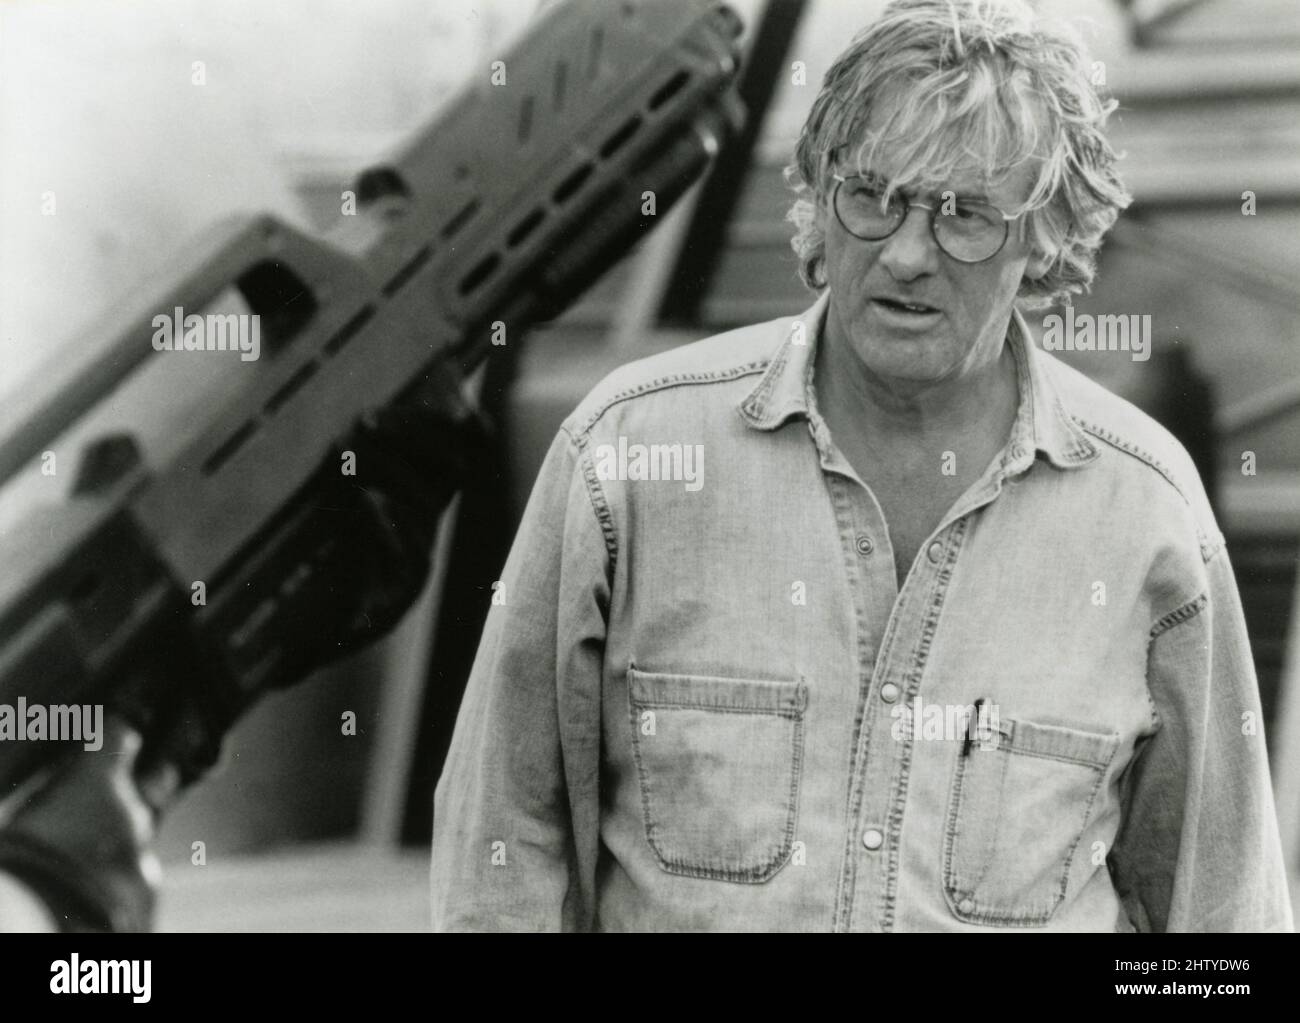 Dutch film director Paul Verhoeven while filming the movie Starship Troopers, USA 1997 Stock Photo